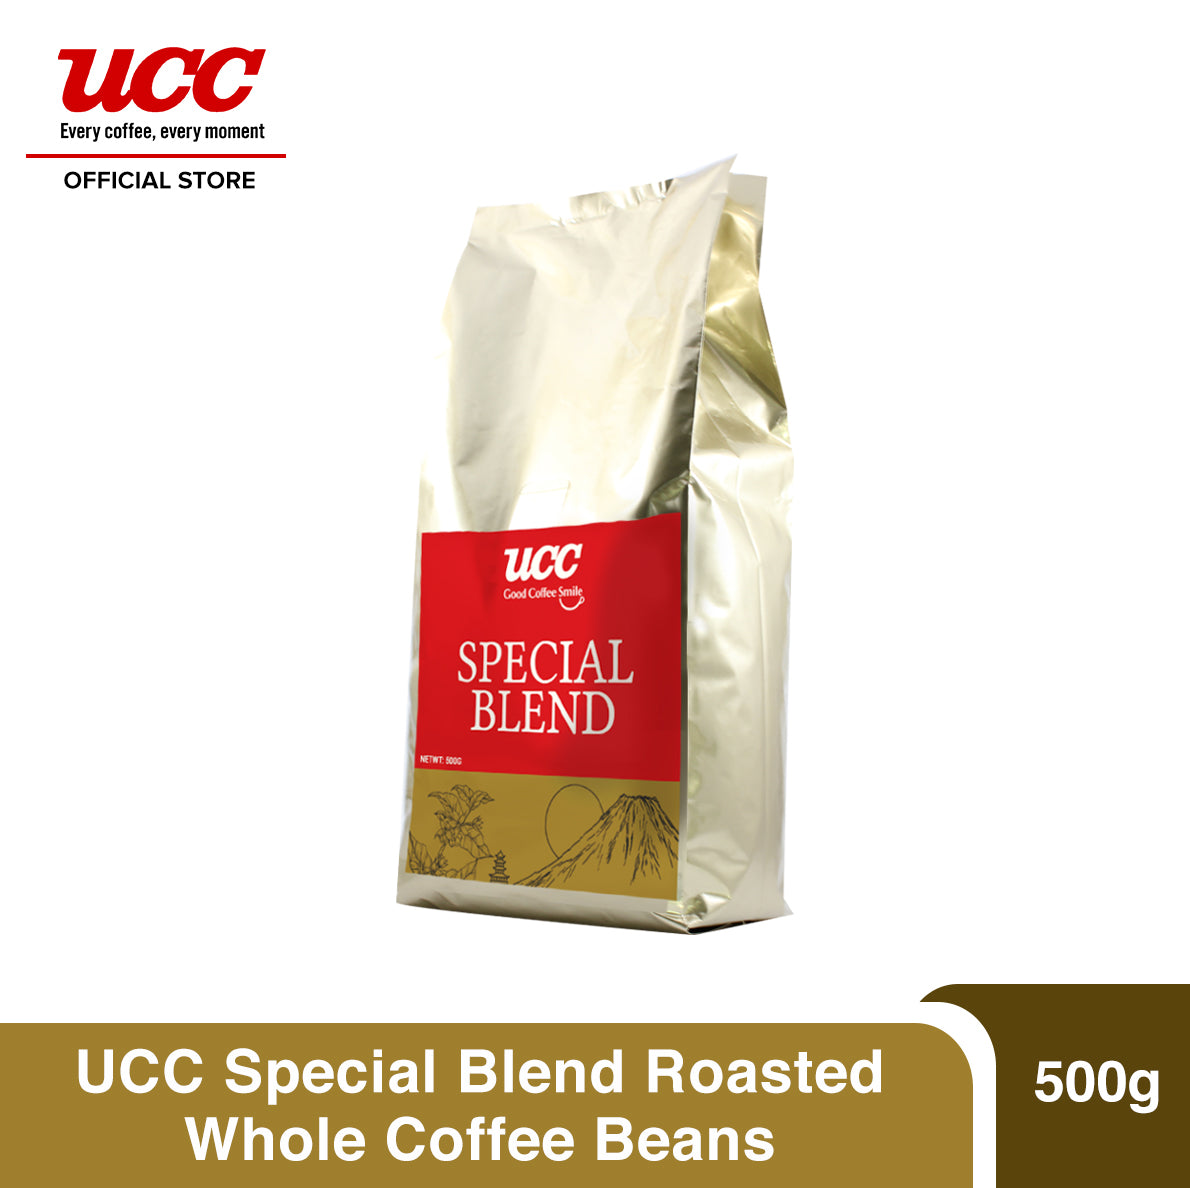 UCC Special Blend Roasted Whole Coffee Beans 500g